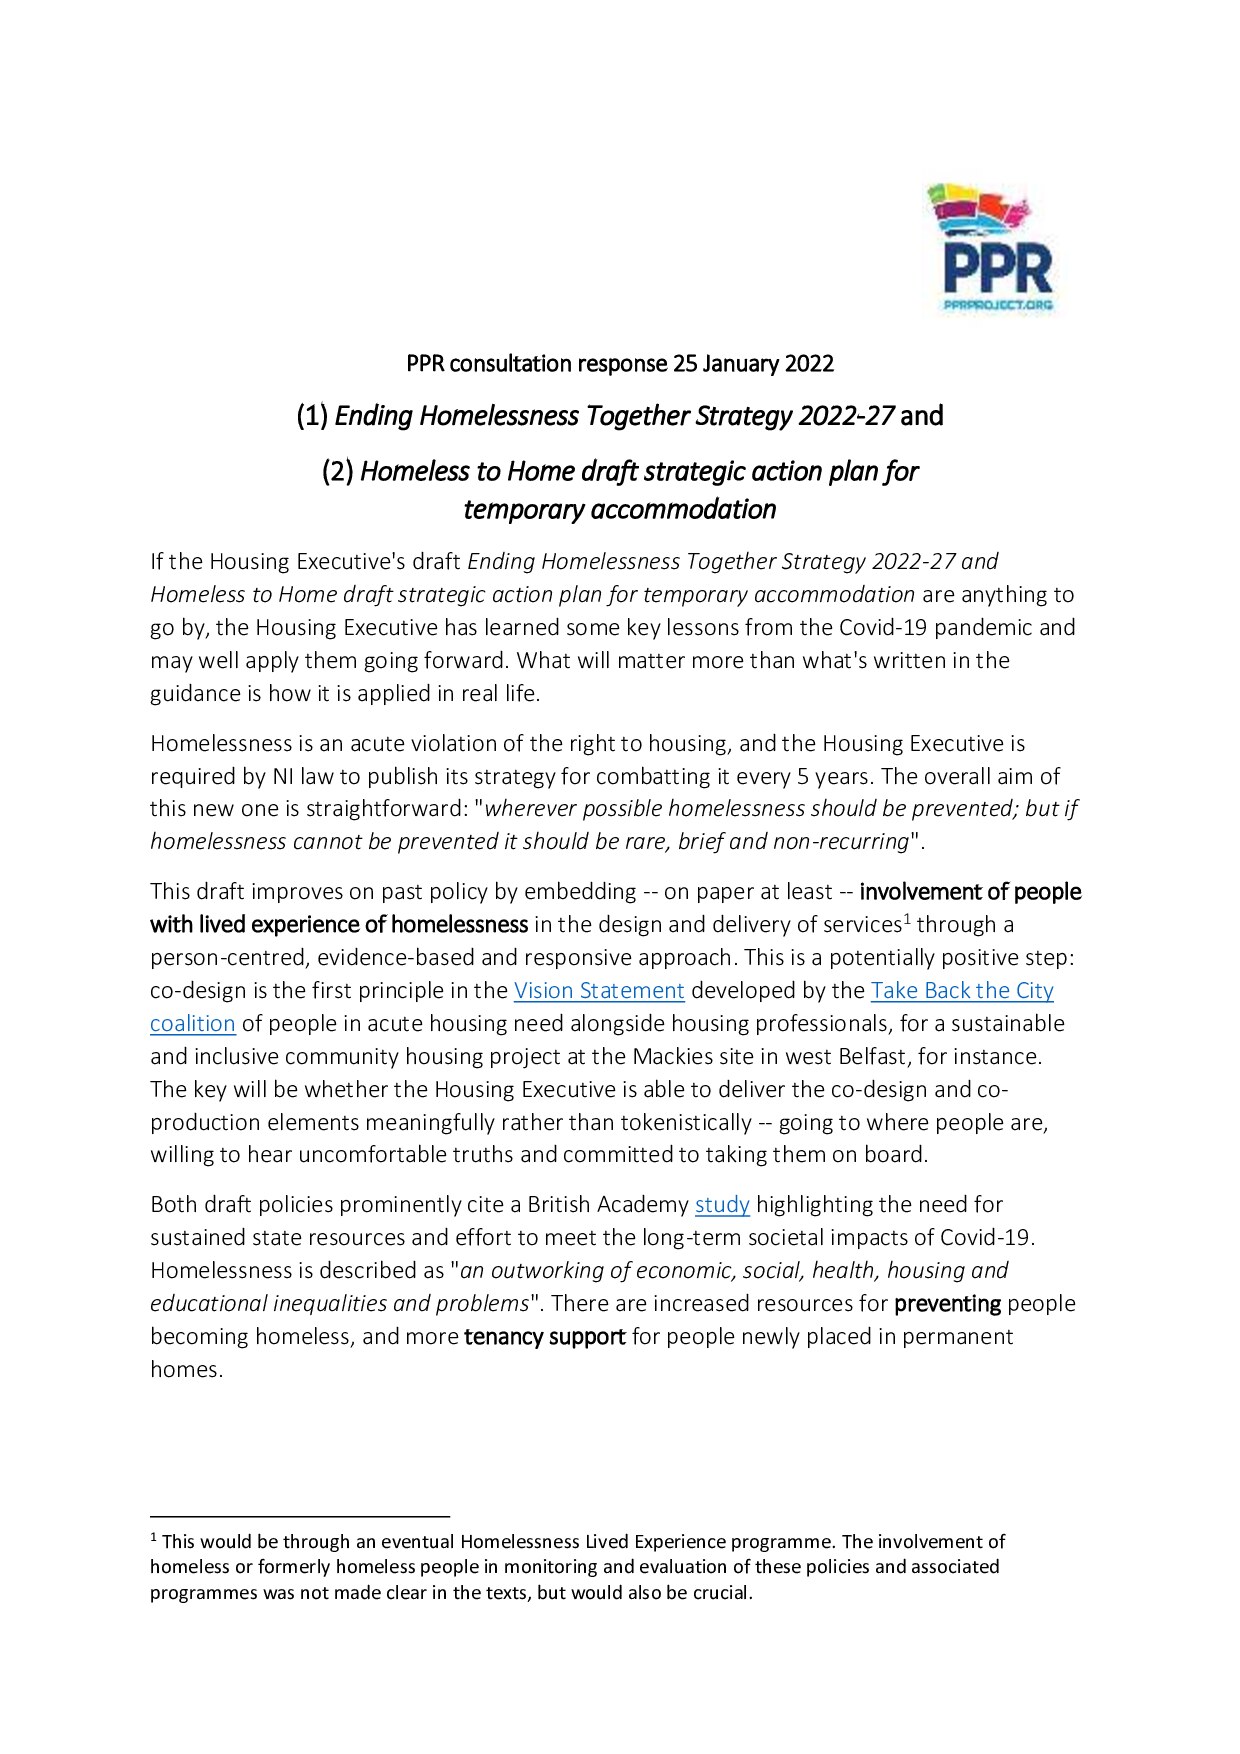 PPR response: Ending Homelessness Together Strategy 2022-27 / temporary accommodation action plan